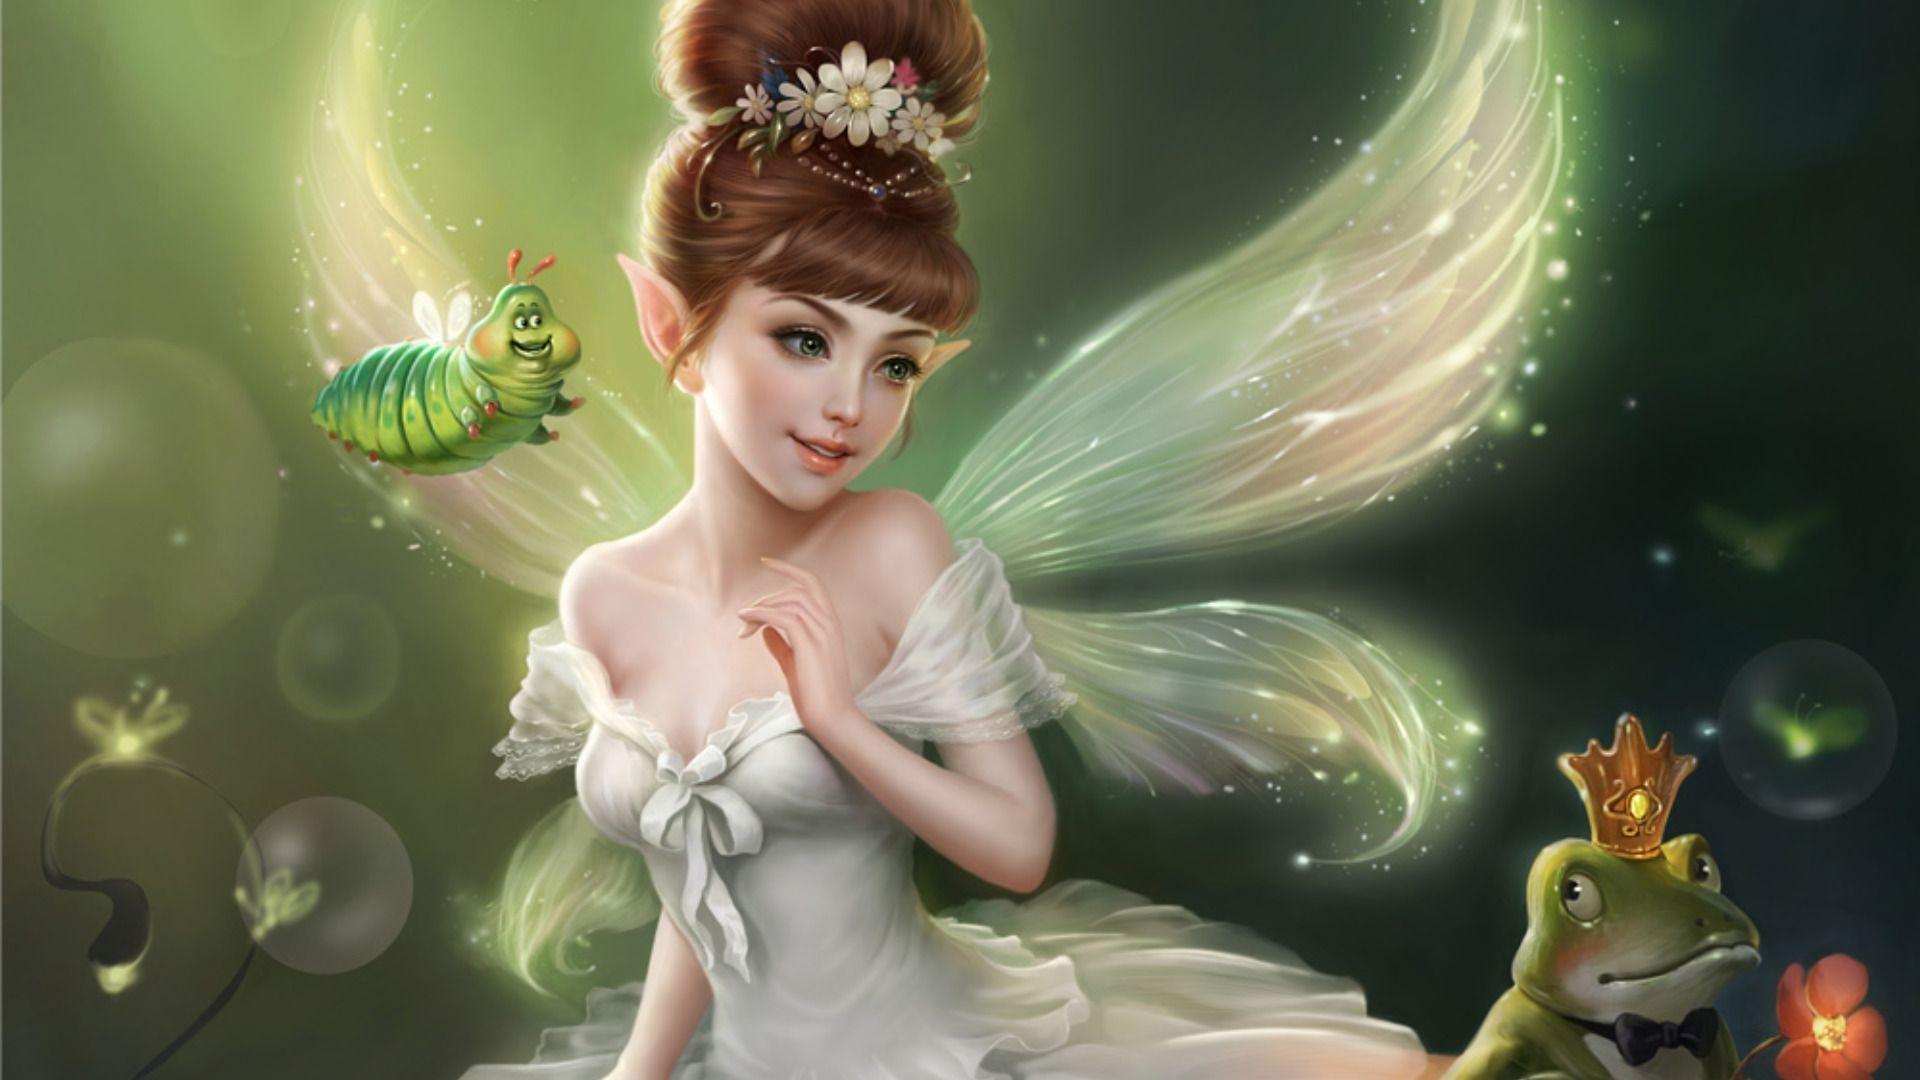 Miracle Angel Fairies Picture Luxury And Angels Wallpaper Animated